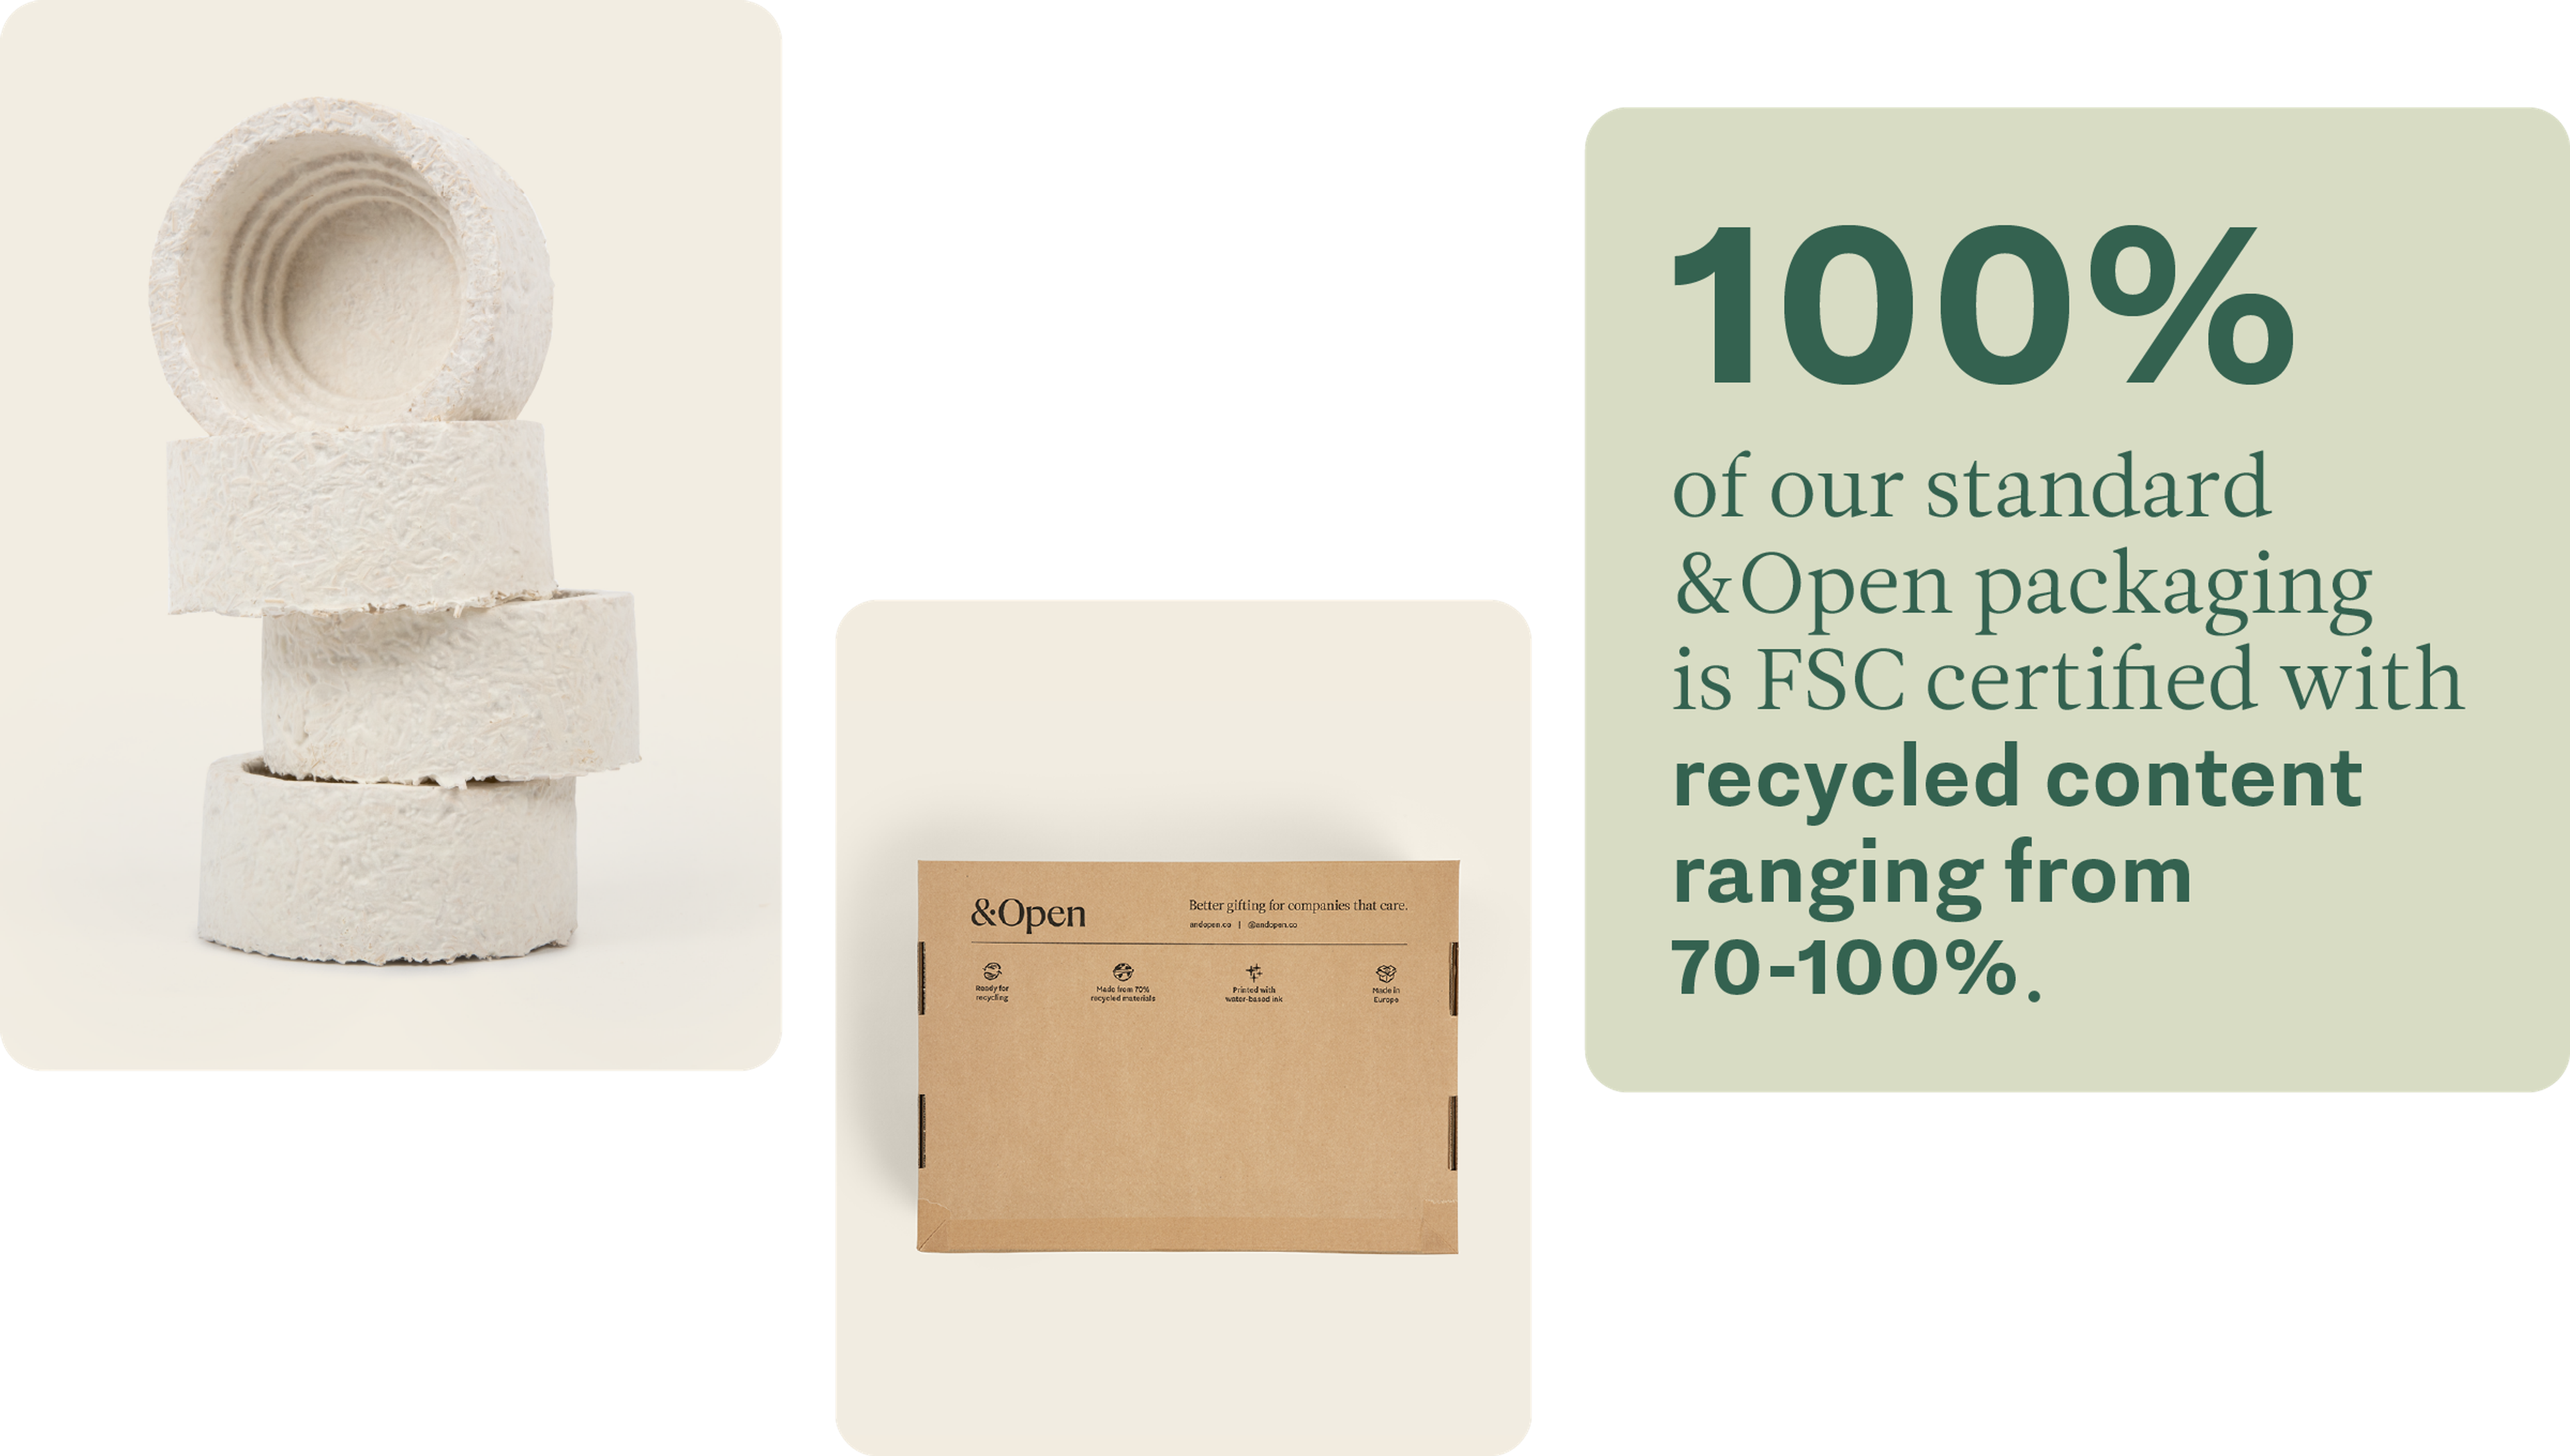 100% of our standard &Open packaging is FSC certified with recycled content ranging from 70-100%